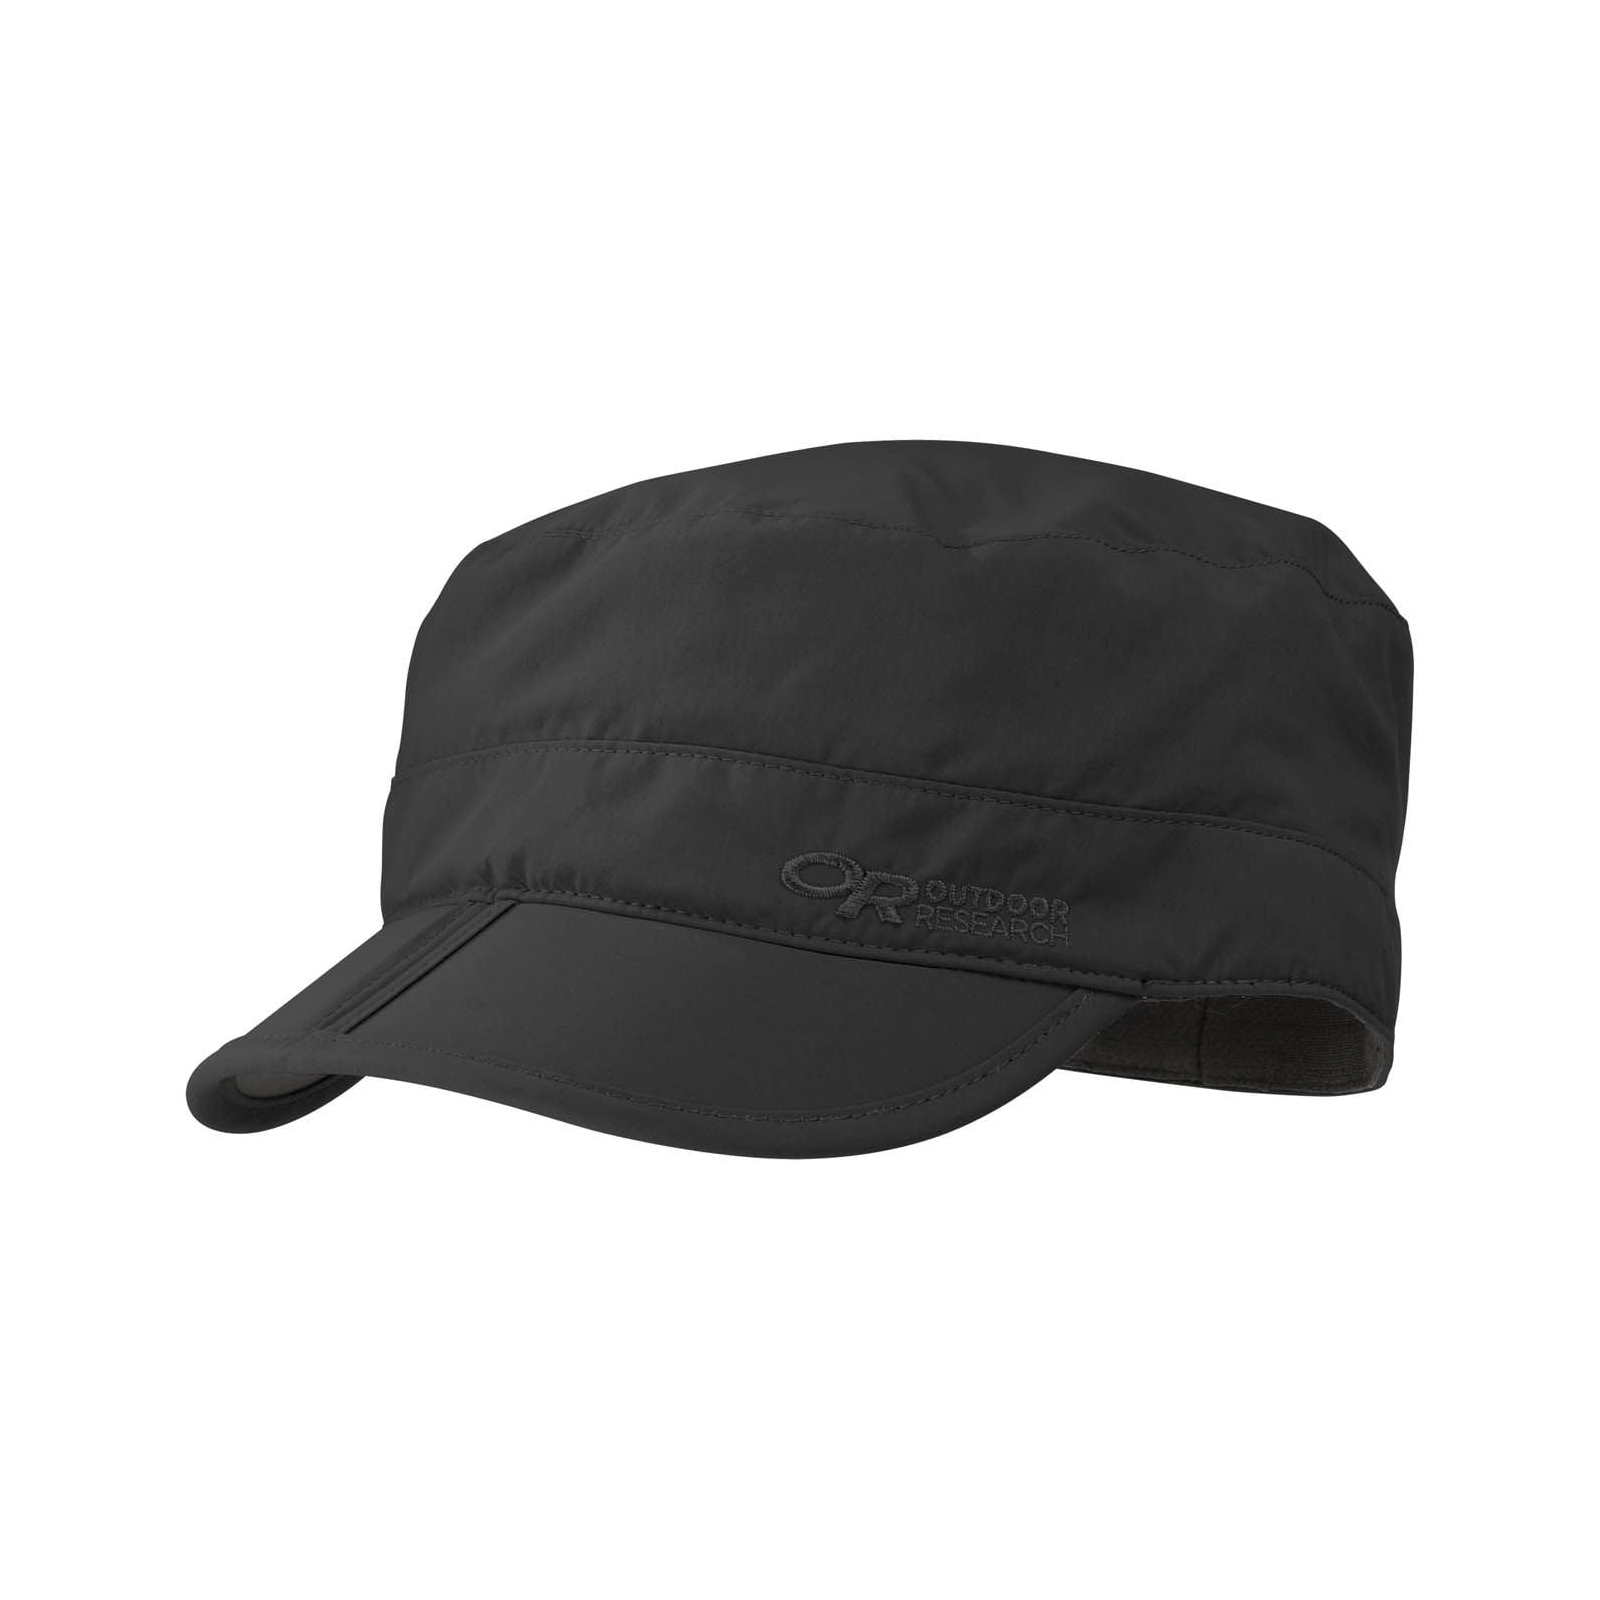 Number 1 in hats! Quality, embroidered, bagged, boxed and shipped